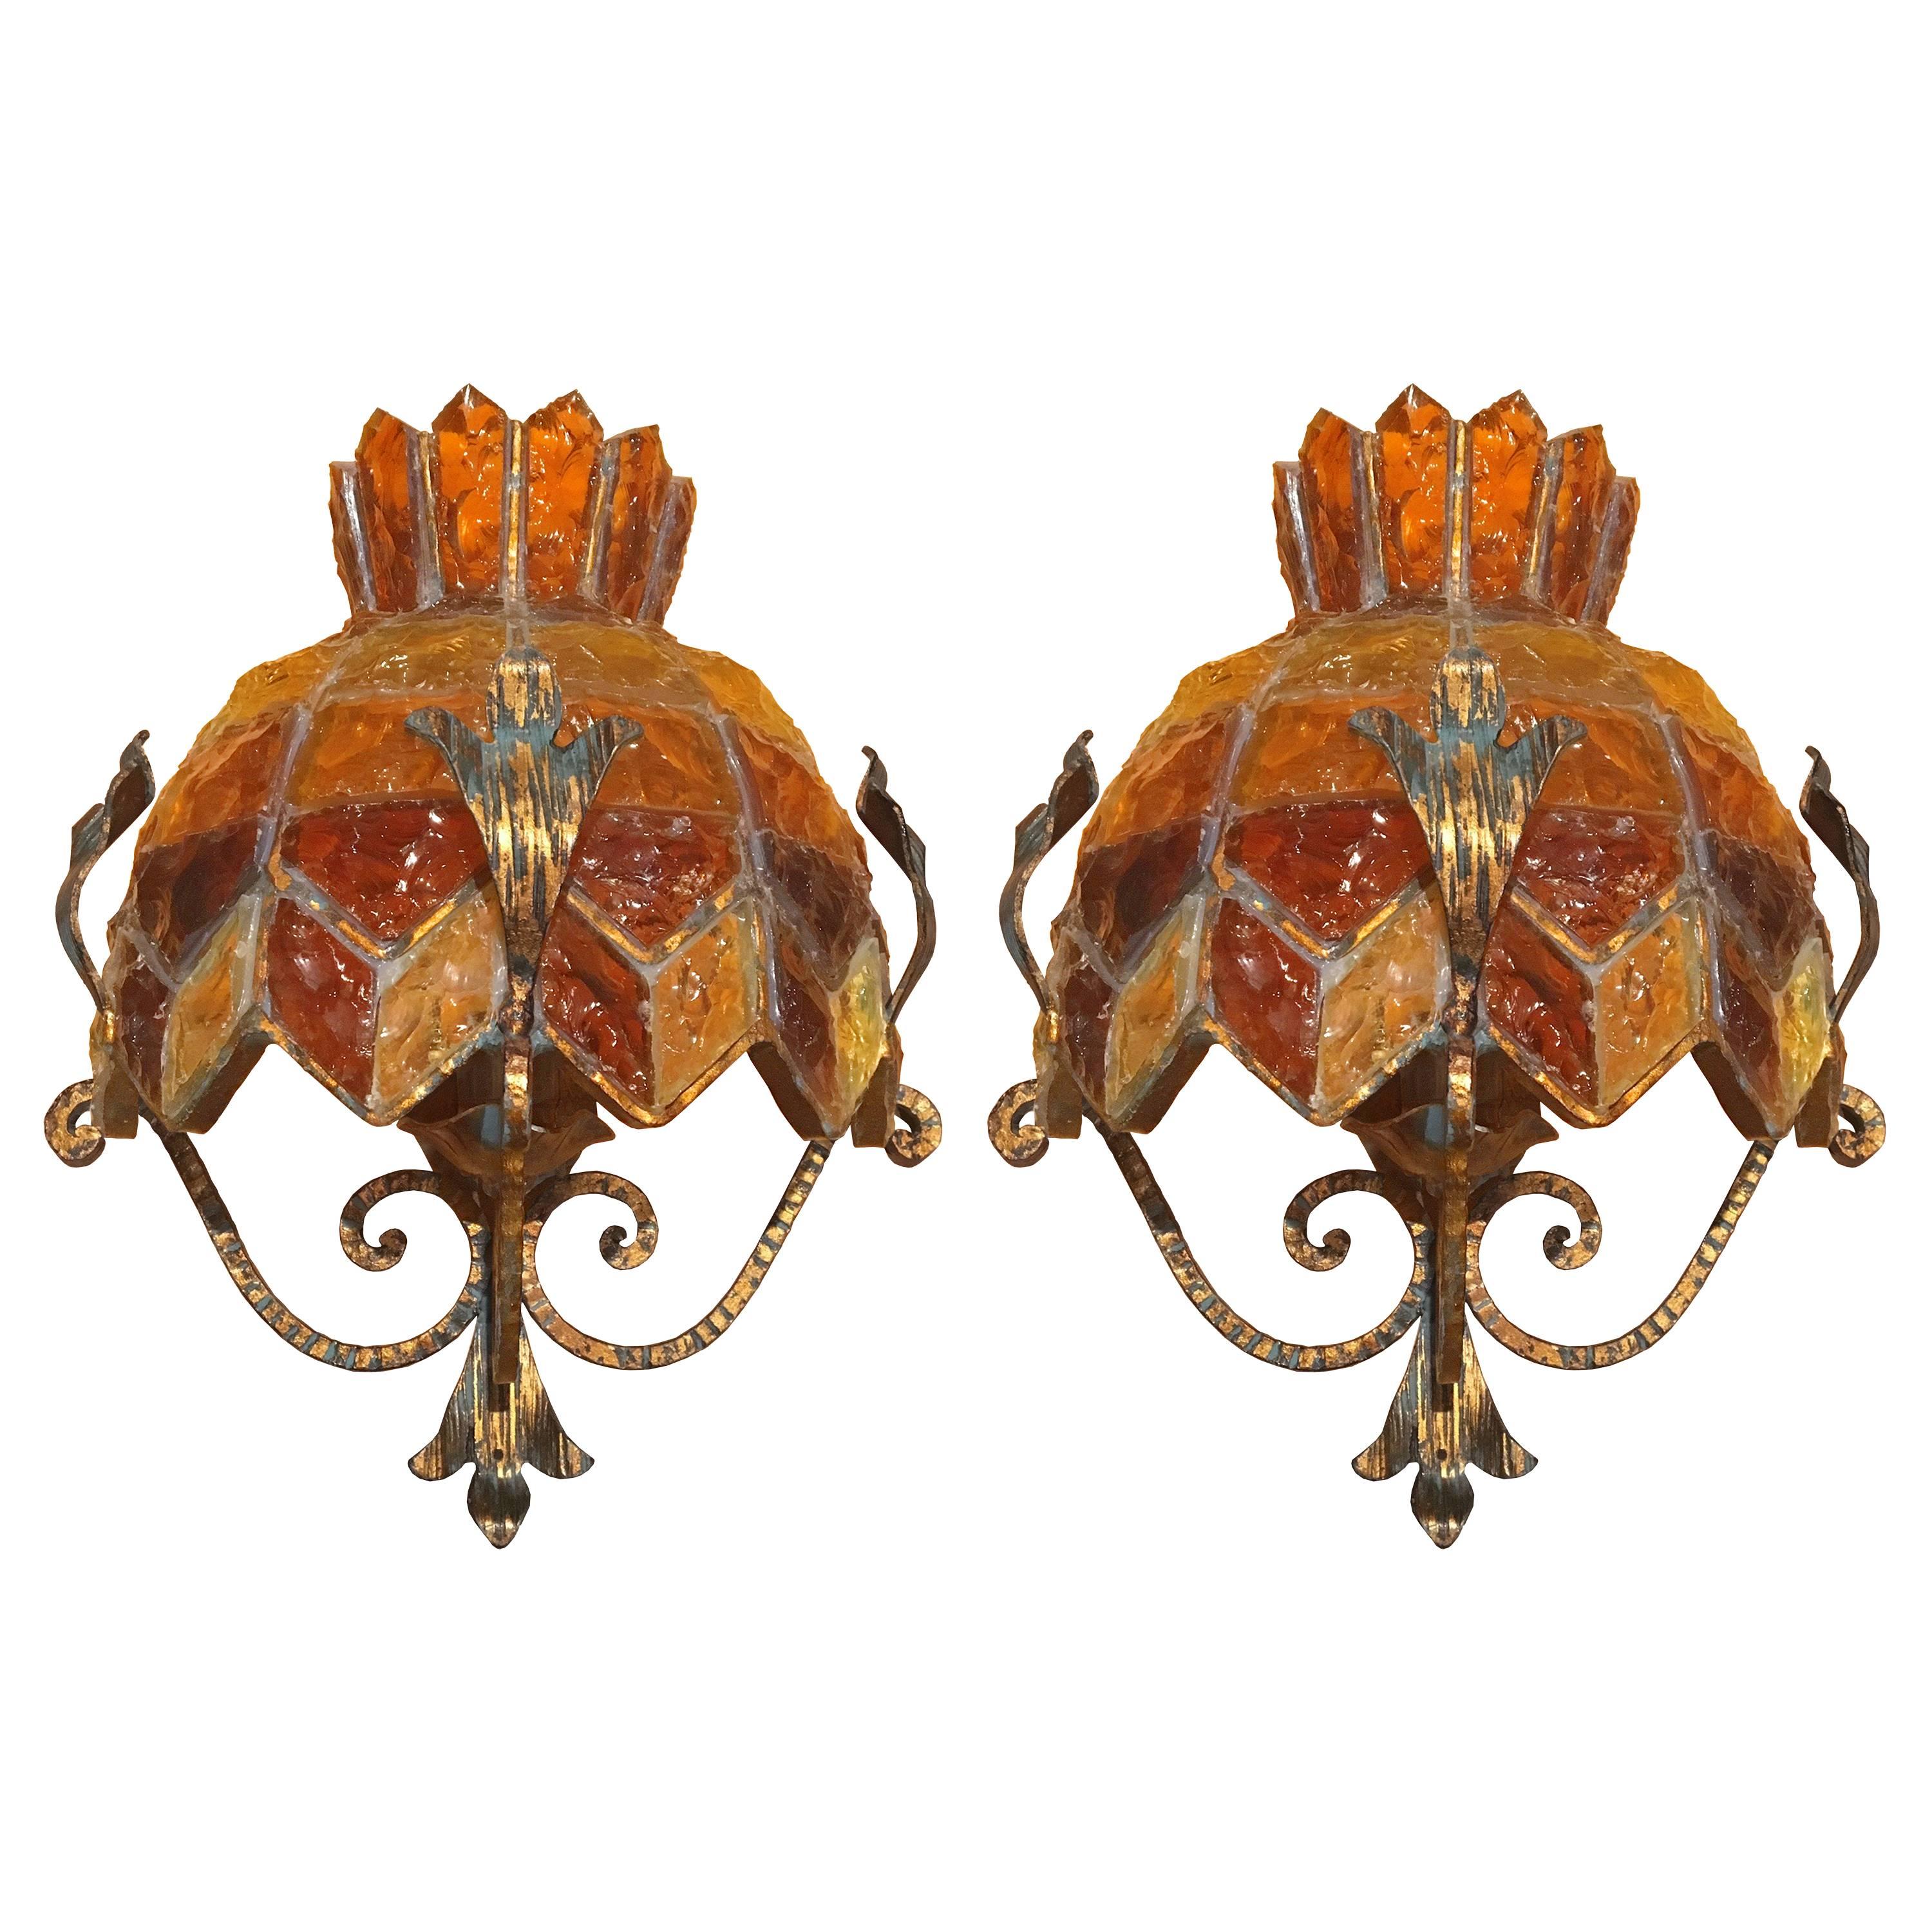 Pair of Brass and Glass Sconces, style of Poliarte (Two Pair Available) For Sale